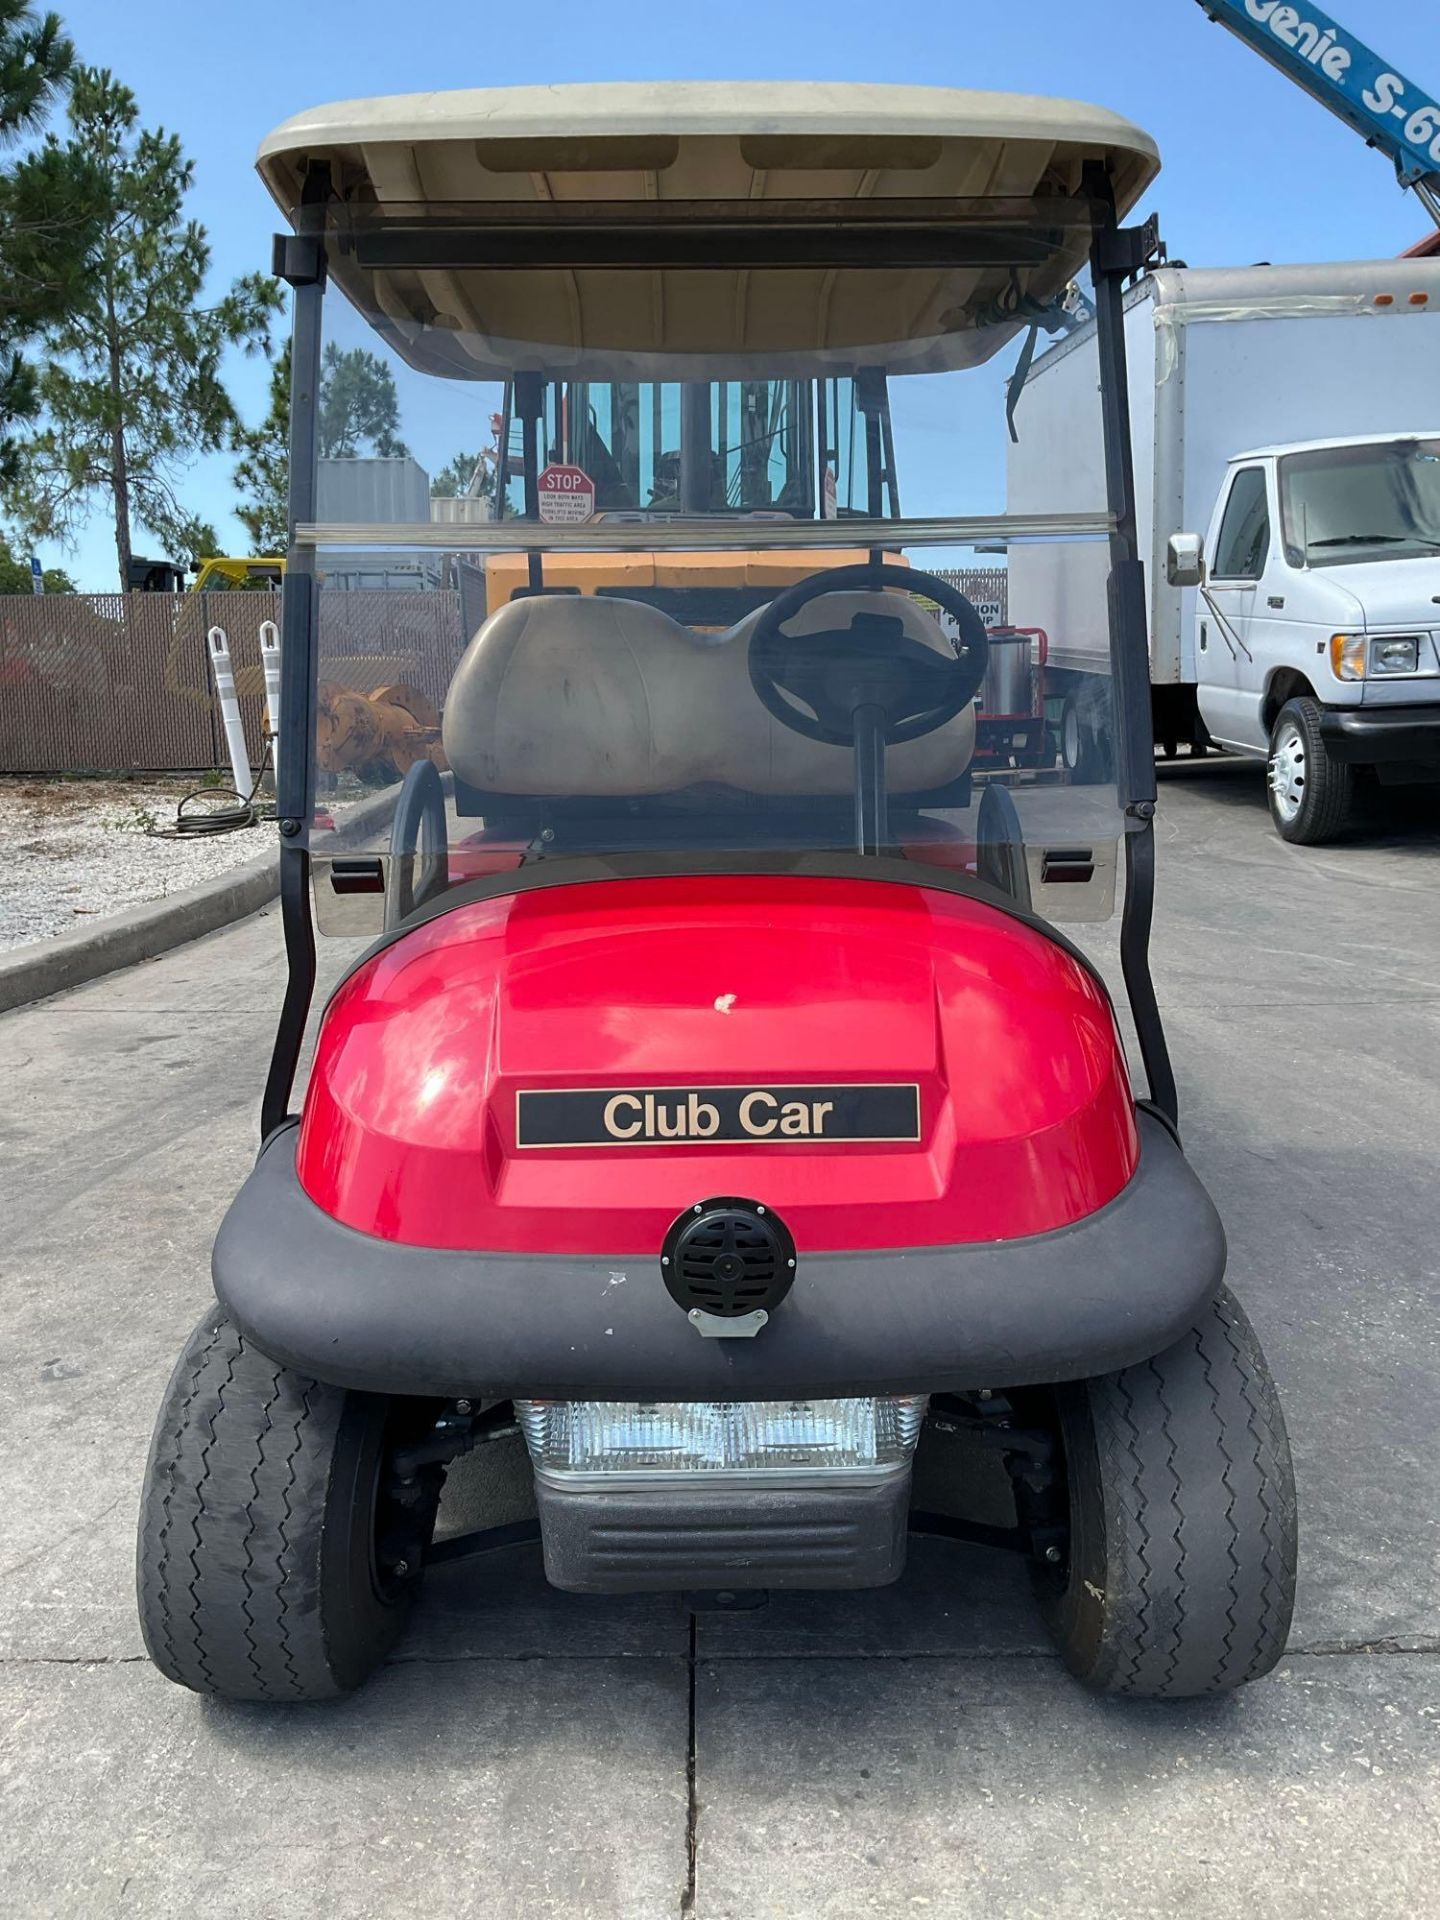 CLUB CAR PRECEDENT GOLF CART, ELECTRIC, UTILITY BED ON BACK, RUNS & DRIVES, CLUBCAR POWER DRIVE 3... - Image 8 of 11